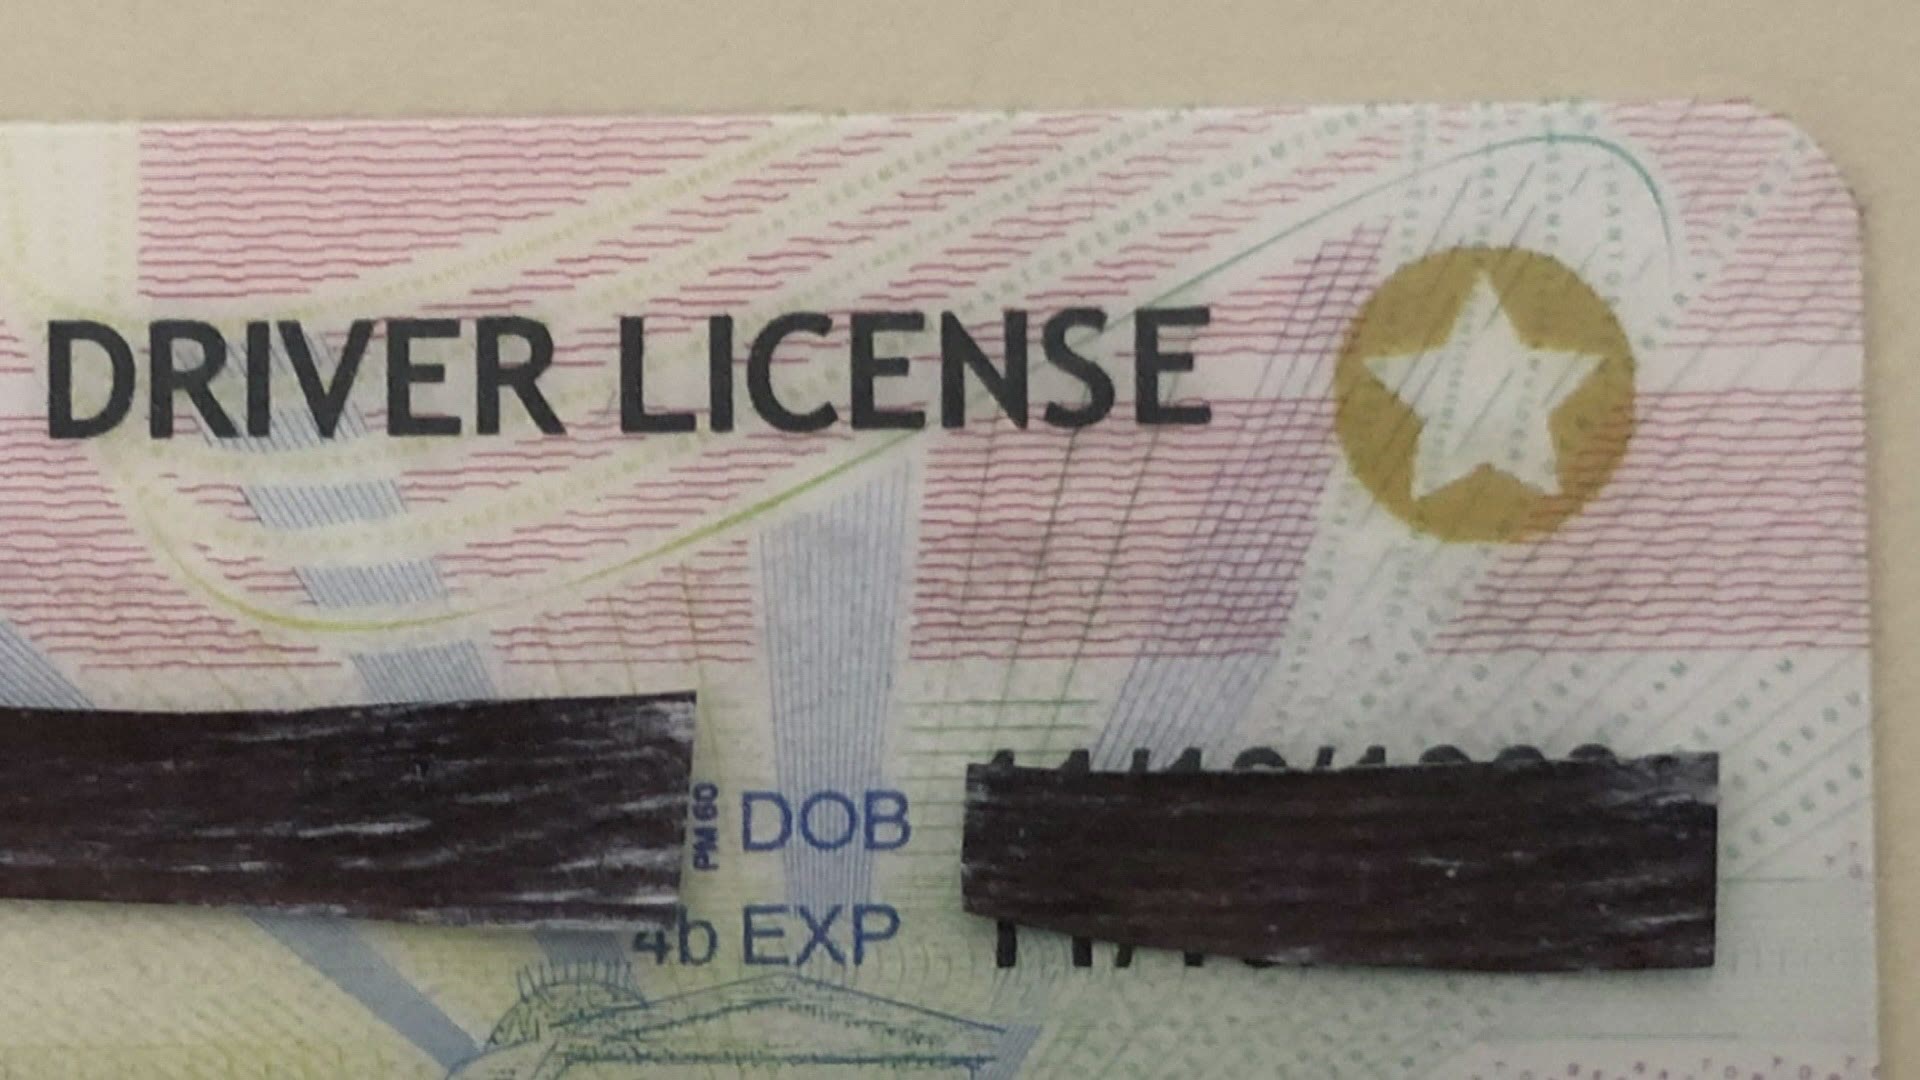 There are some other specific types of id, in addition to a passport, that can still be used in place of the real ID.